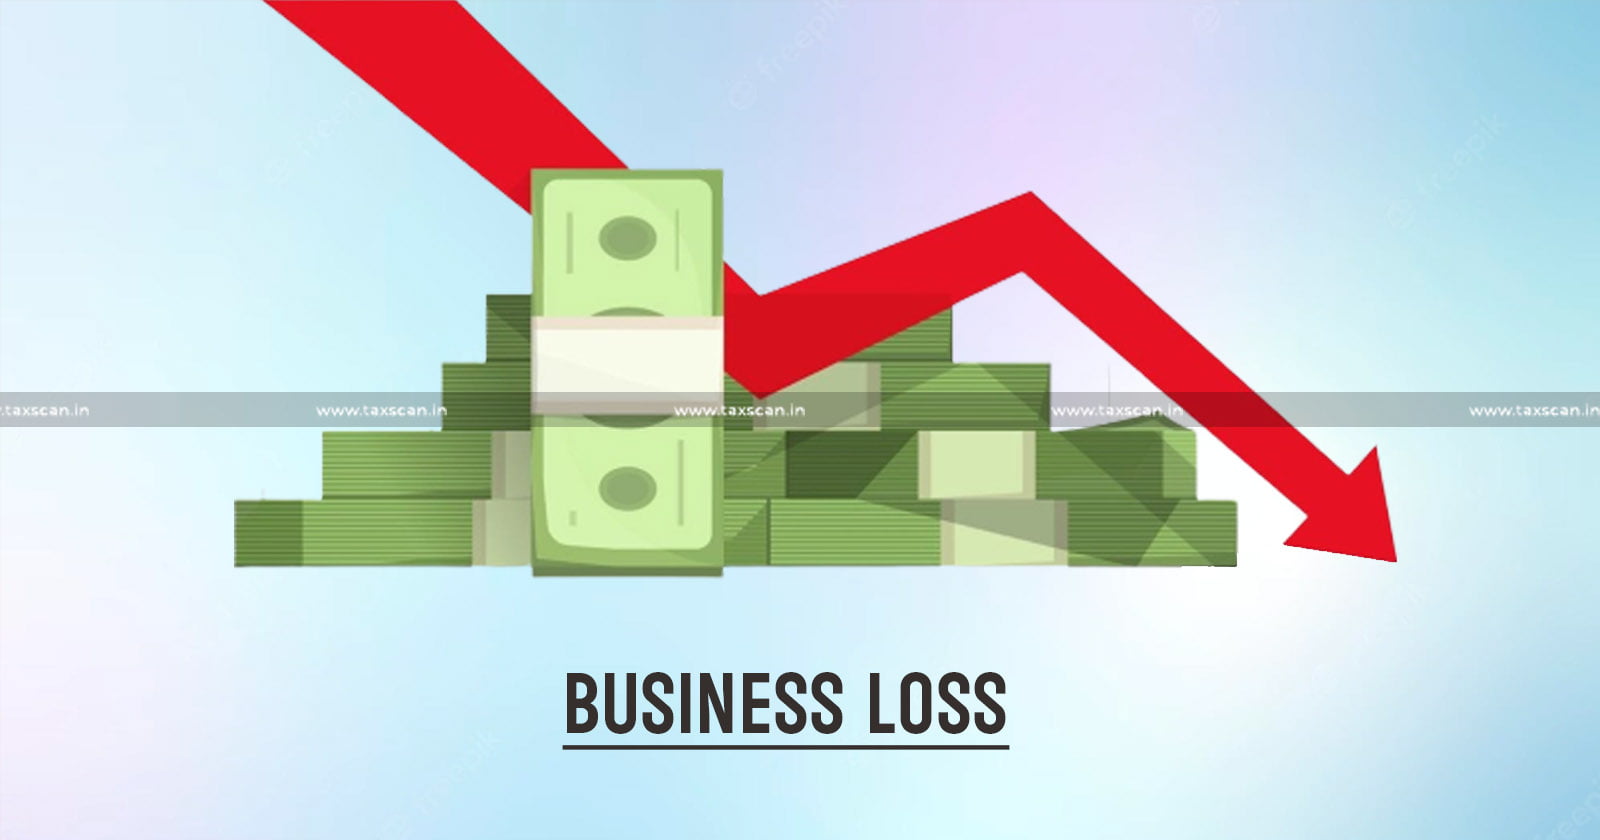 Loss - Sale of Govt Securities - Bank - Business Loss - ITAT - Income Tax Deduction - taxscan